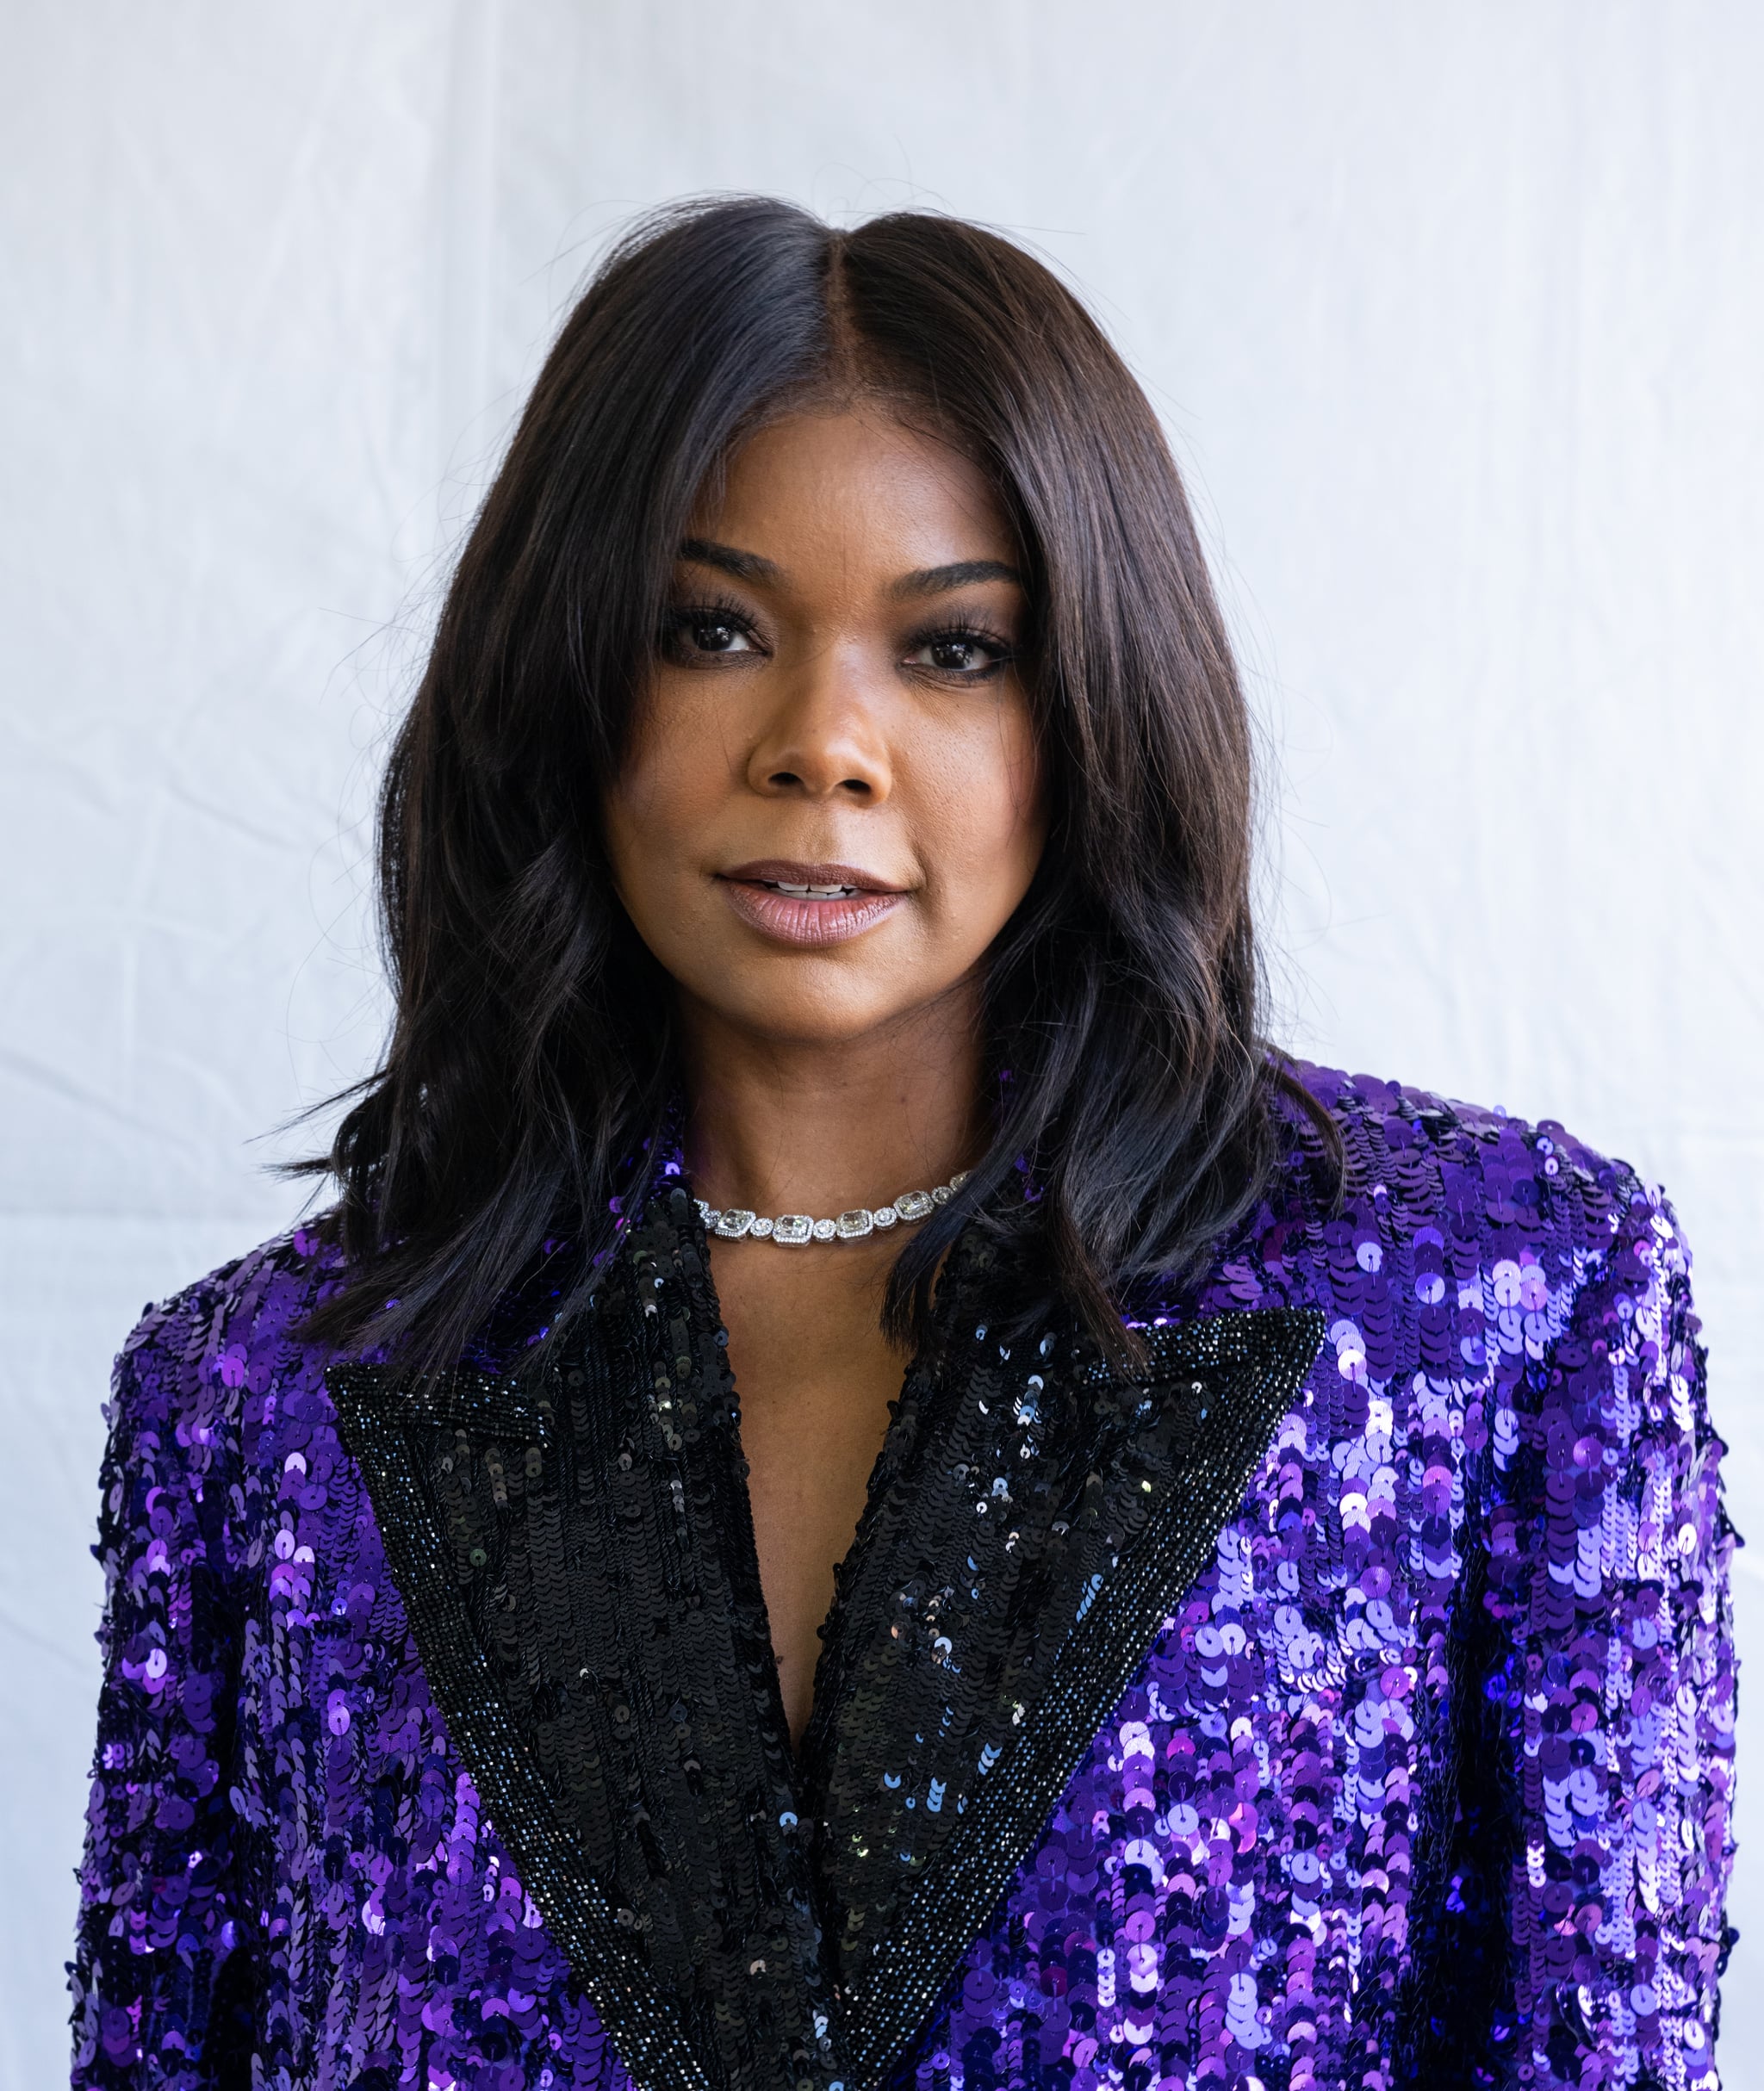 SANTA MONICA, CALIFORNIA - MARCH 04: Actress Gabrielle Union attends the 2023 Film Independent Spirit Awards on March 04, 2023 in Santa Monica, California. (Photo by Amanda Edwards/Getty Images)